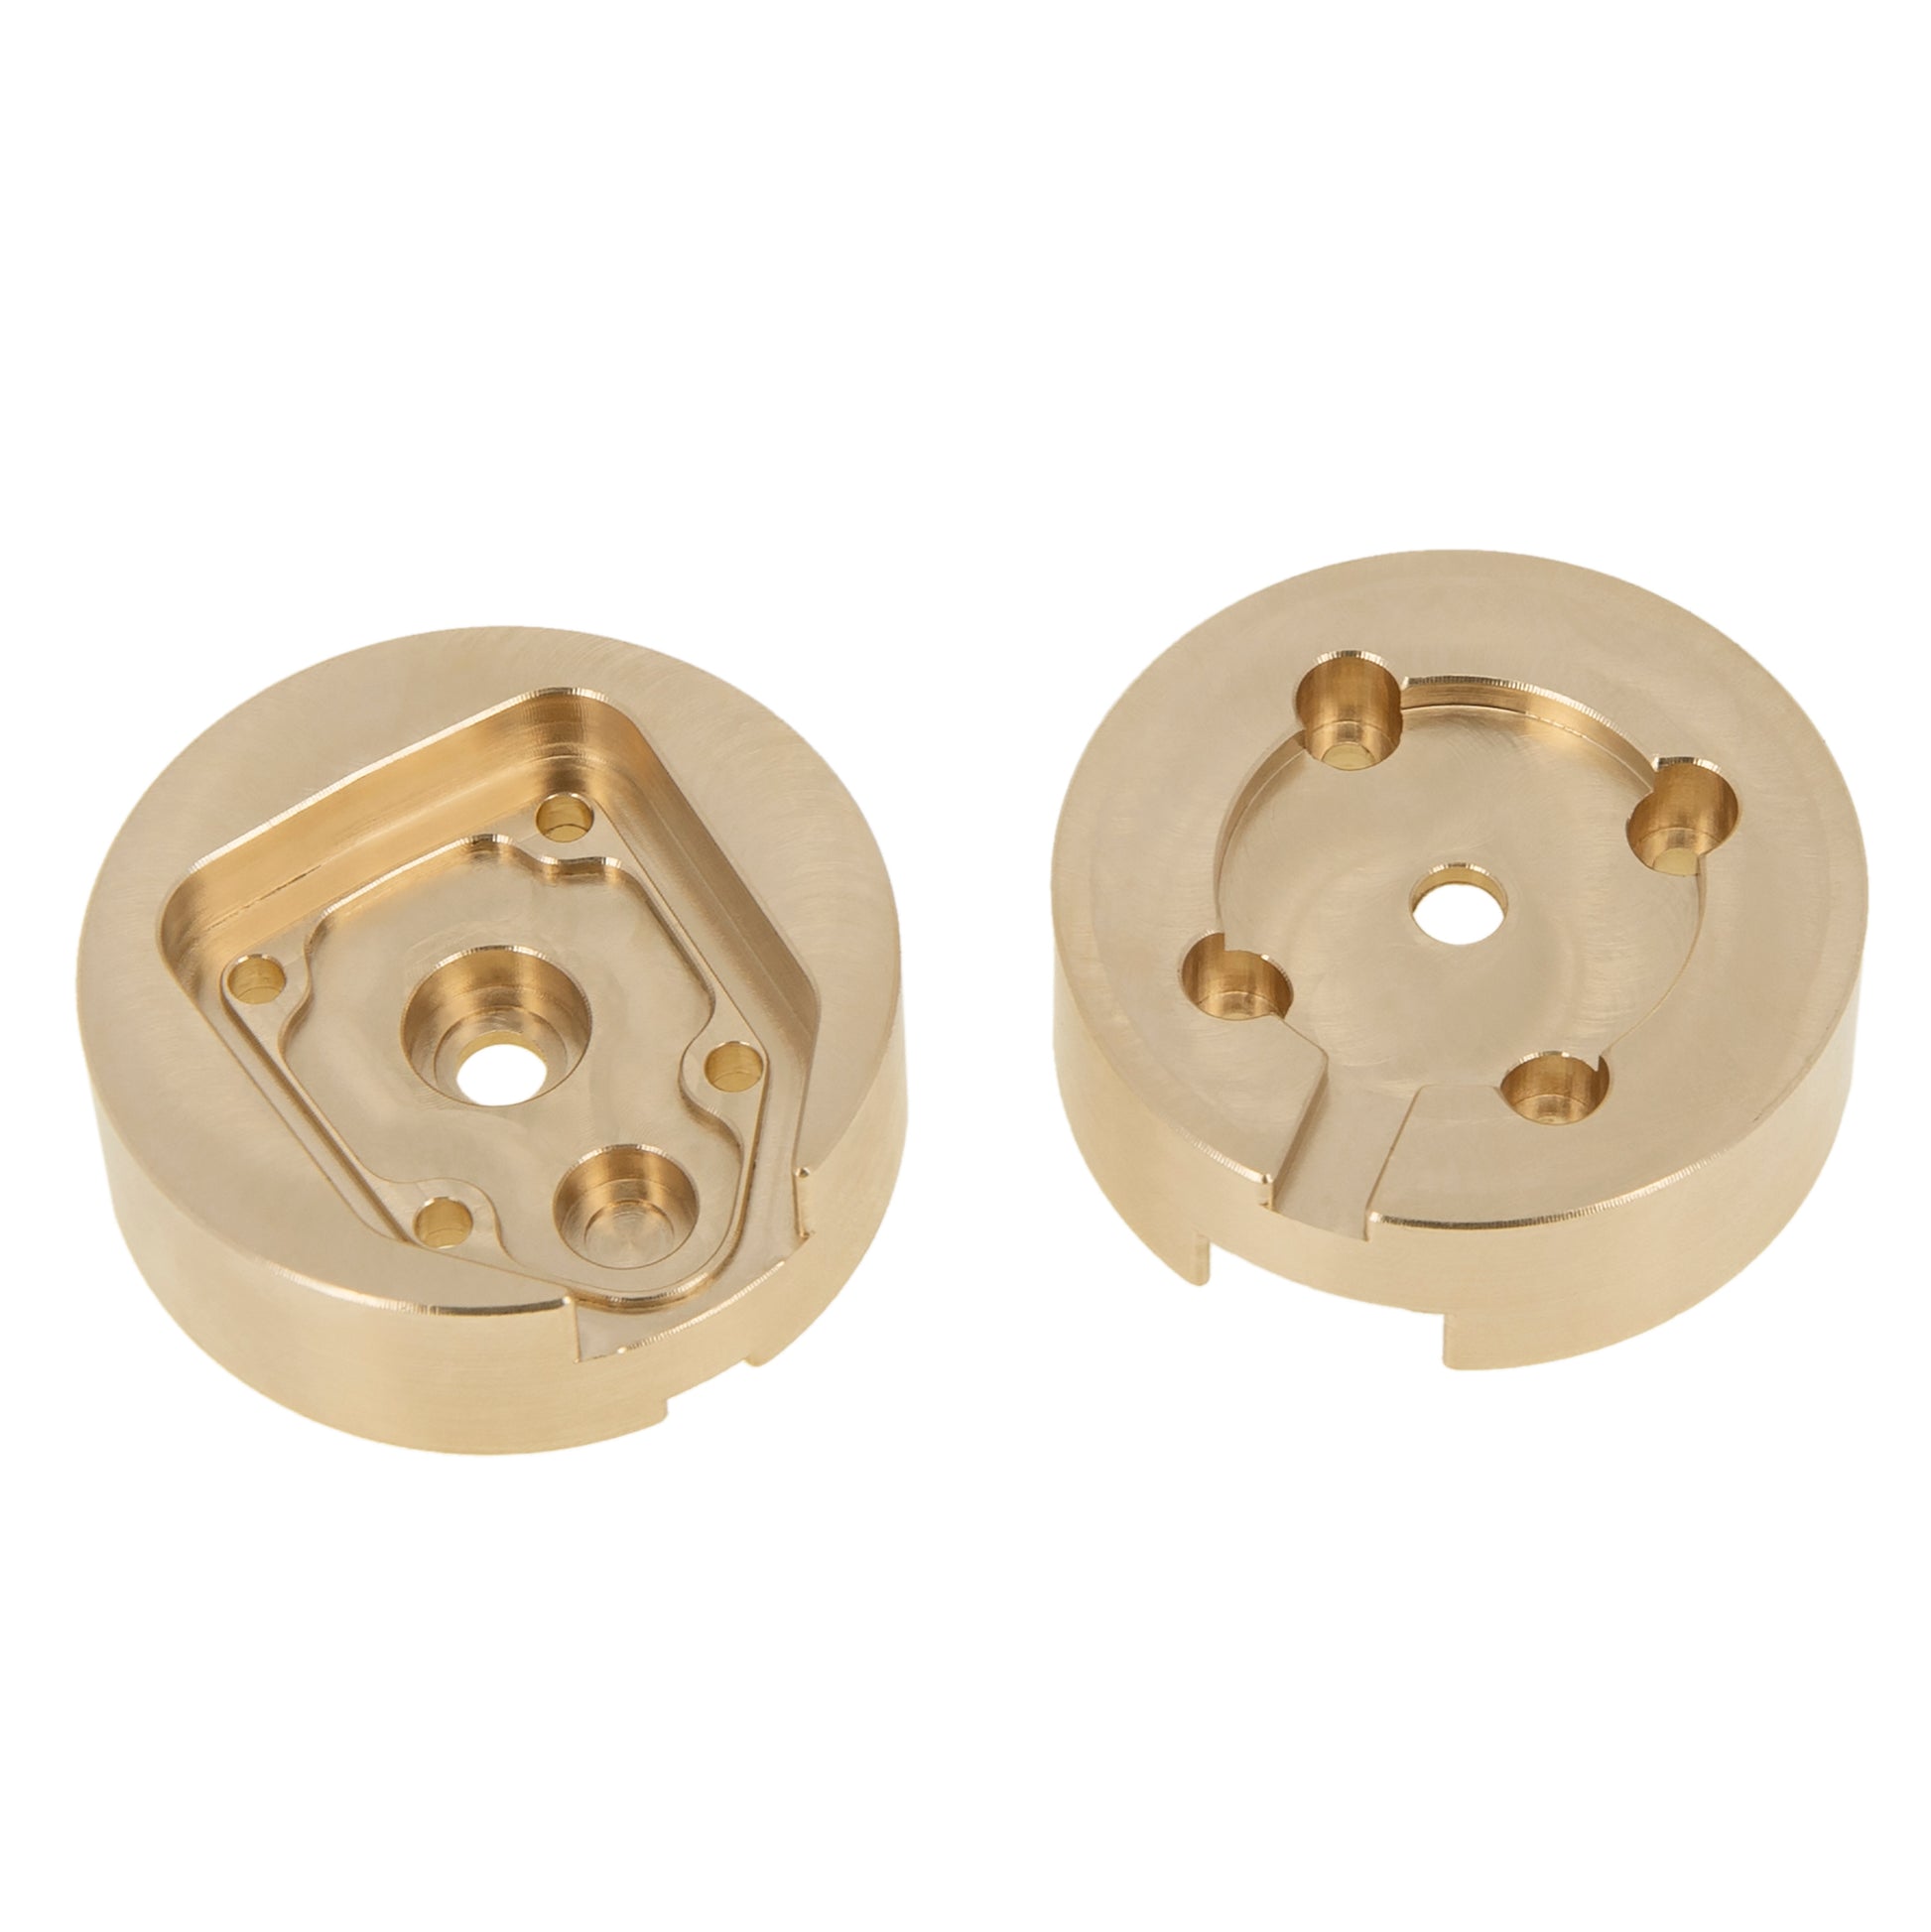 Brass Rear Axle Outer Housing Covers for UTB18 Capra